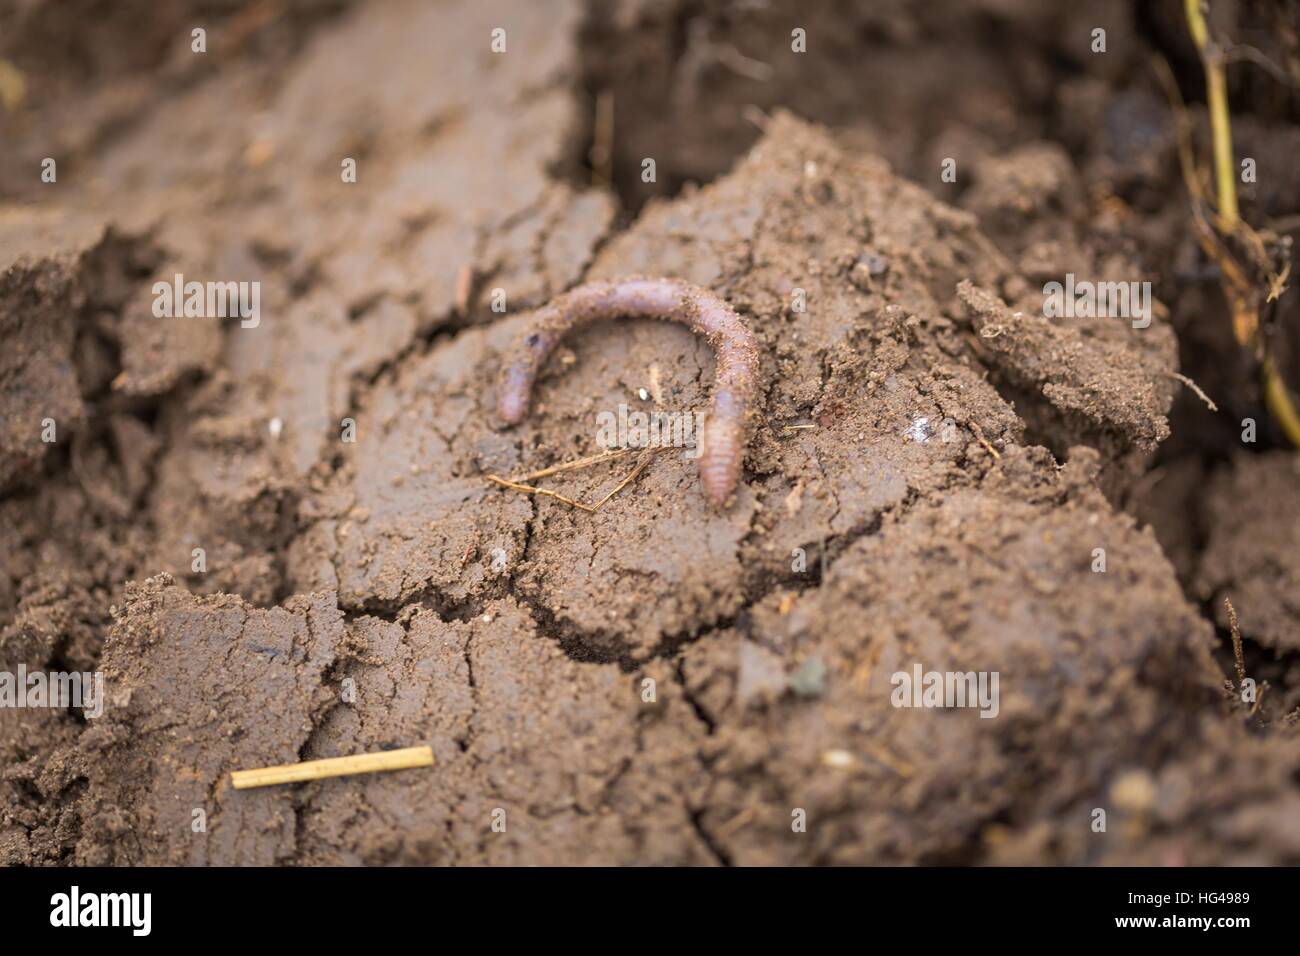 Earthworm lying on soil. Worms living under the ground. Stock Photo